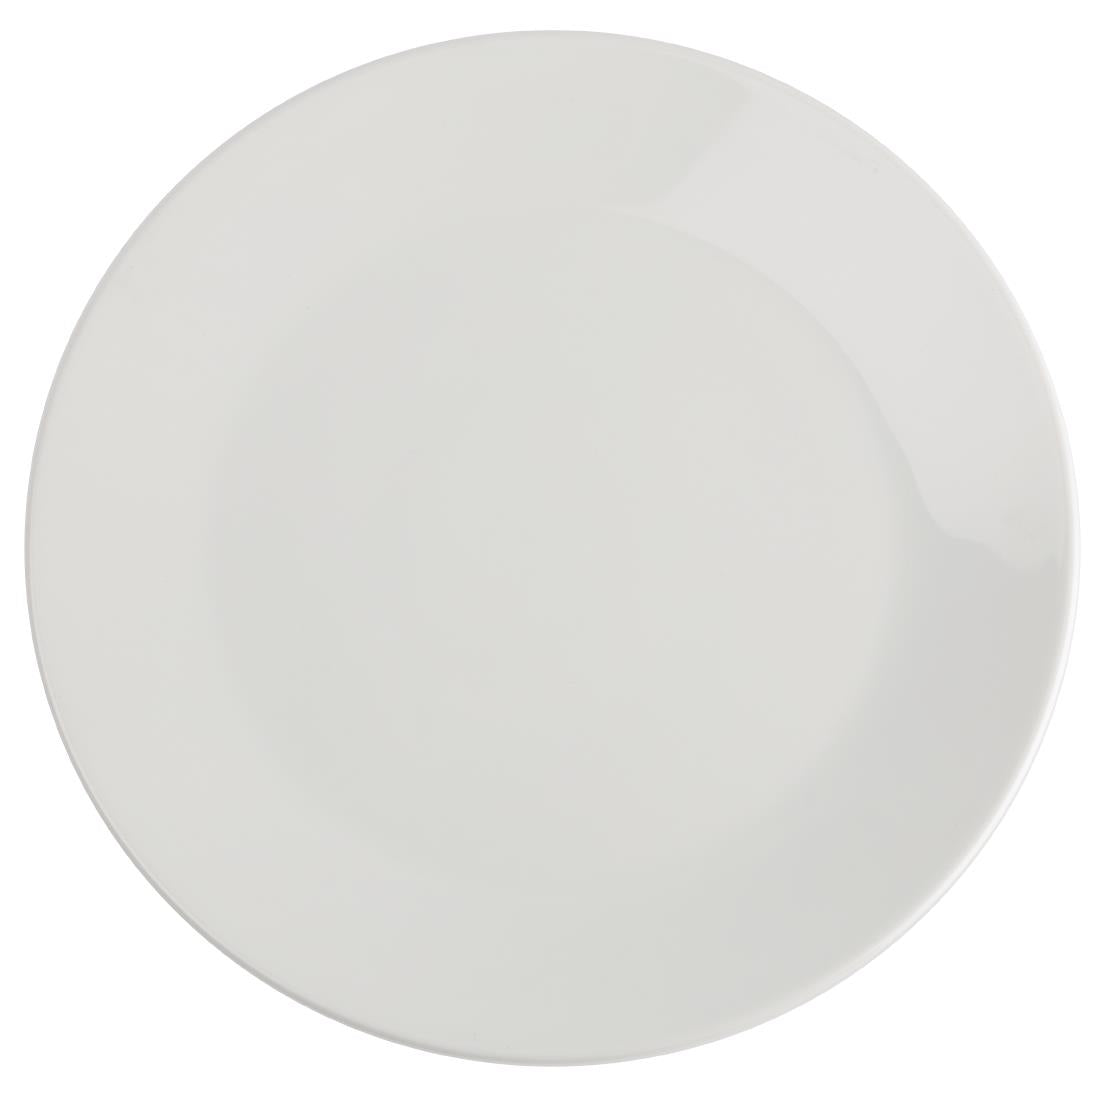 Royal Porcelain Classic White Coupe Plates 240mm (Pack of 12)